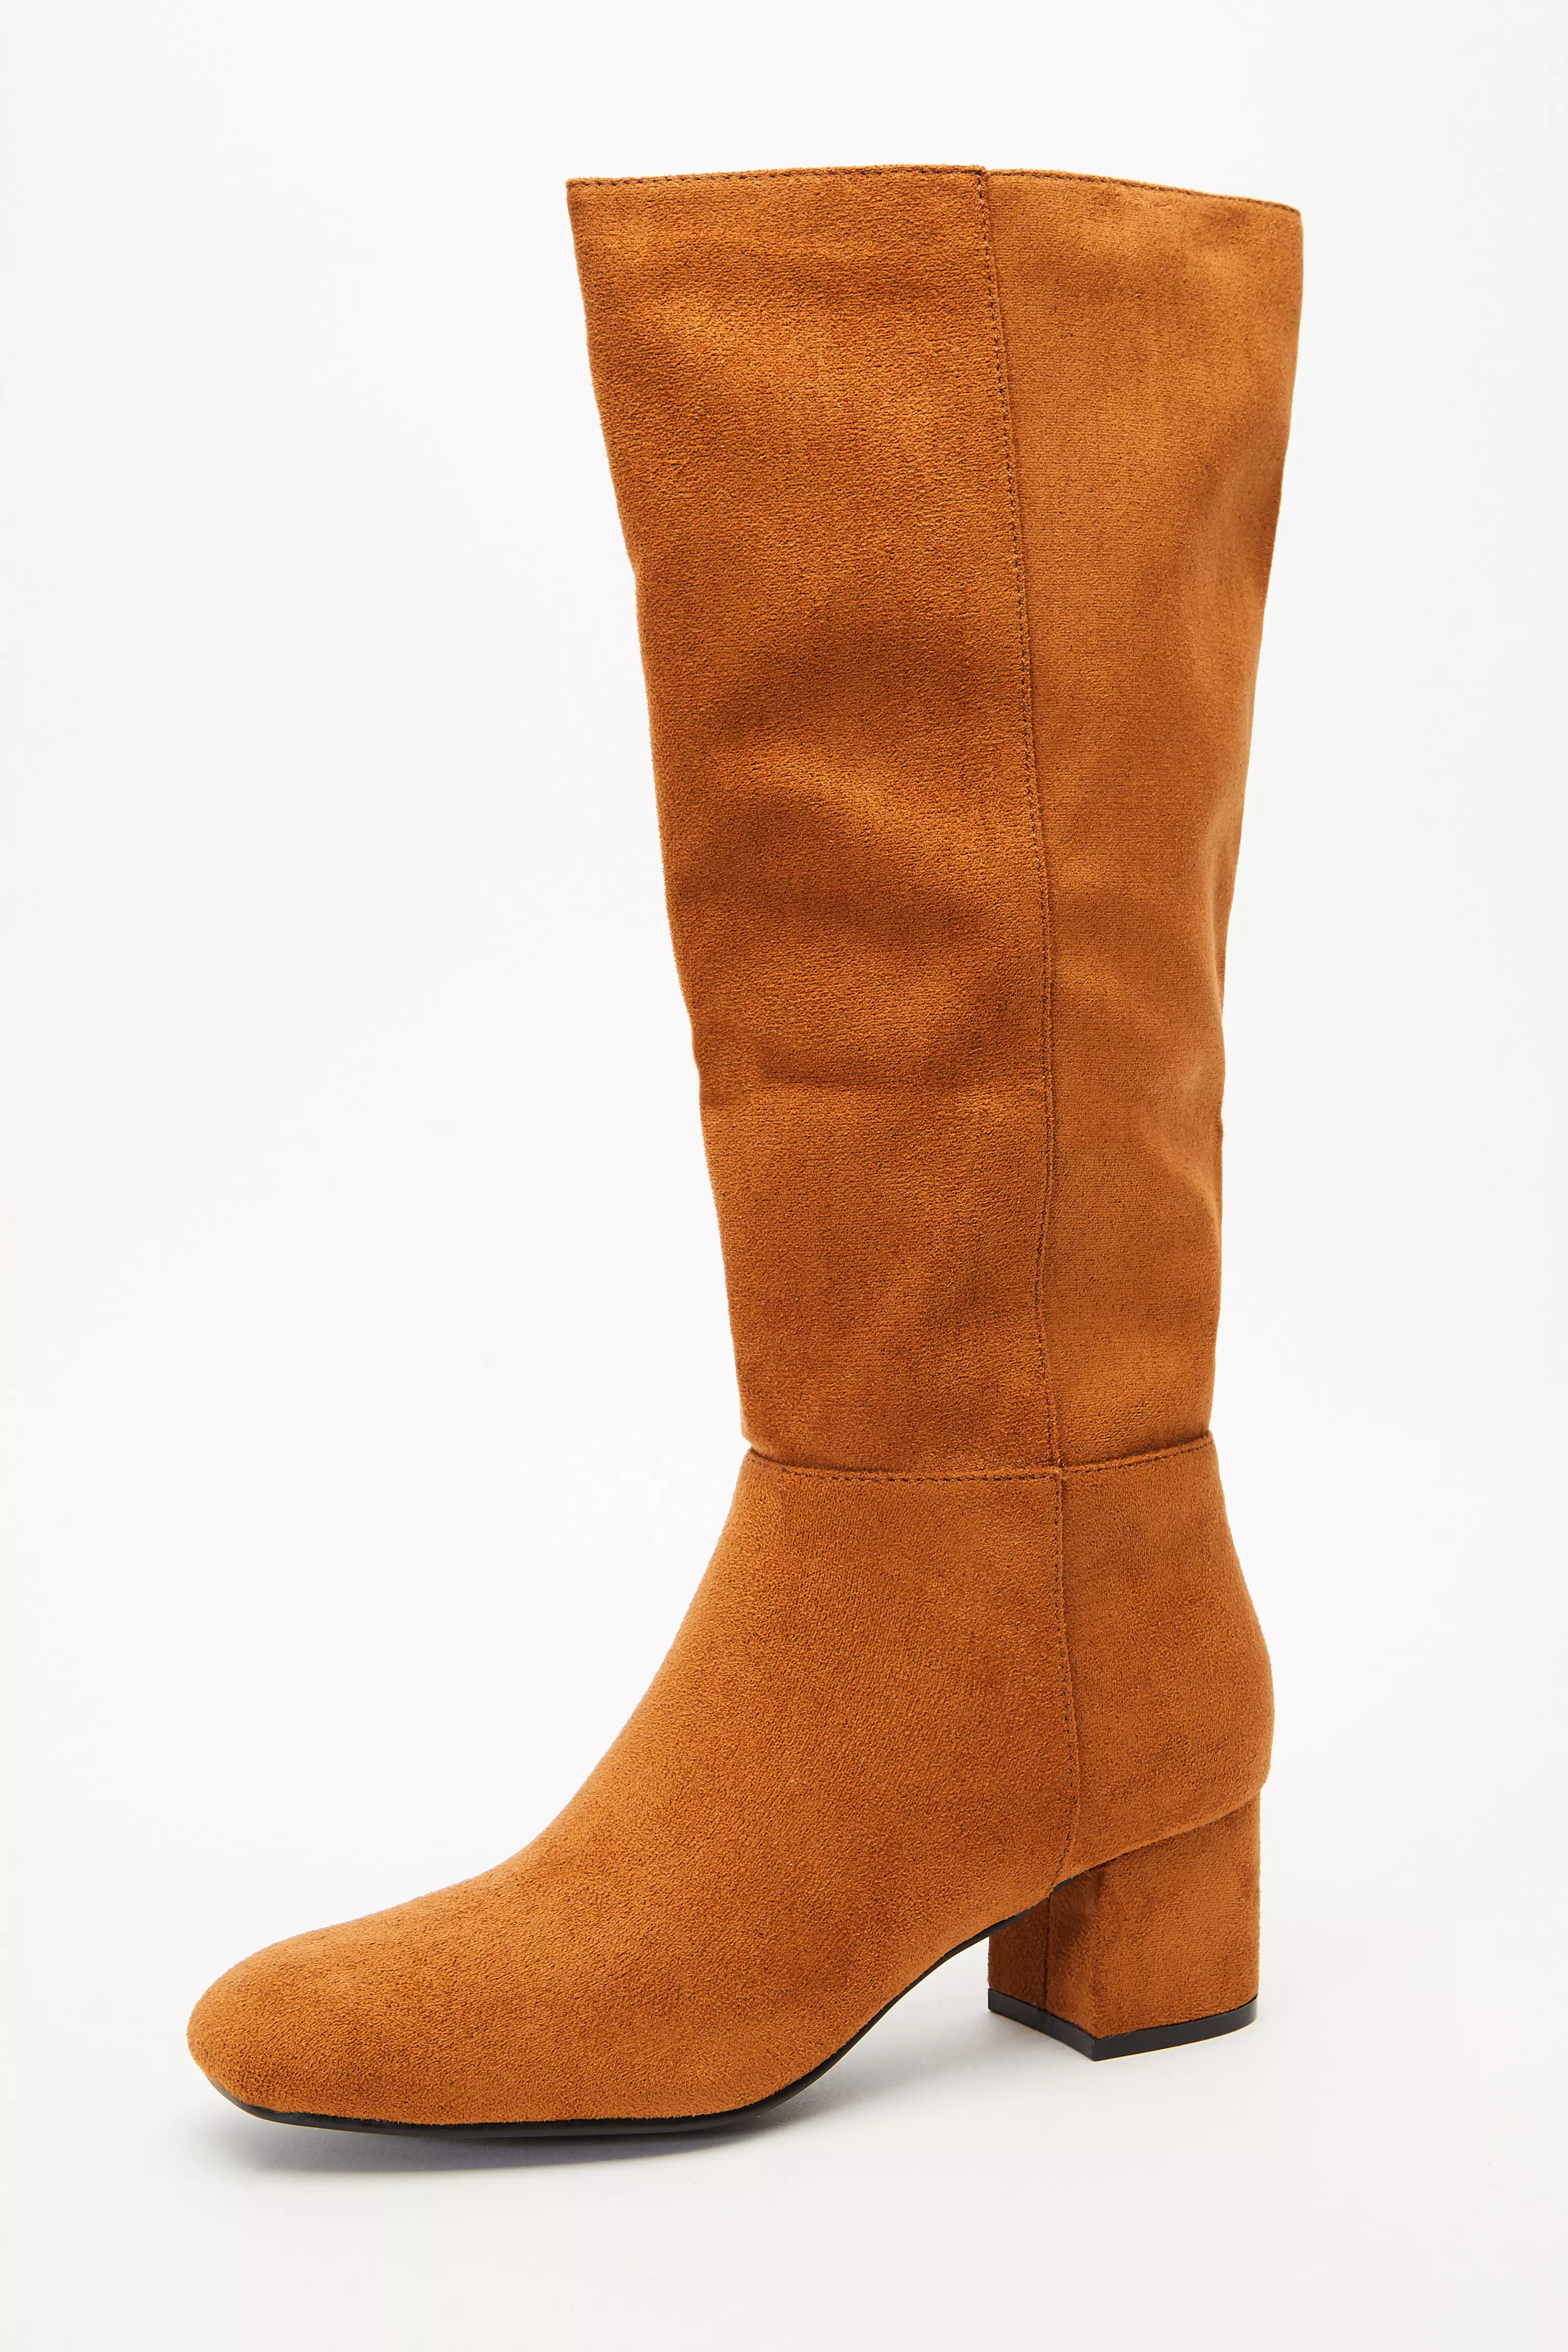 Tan Faux Suede Knee High Boots